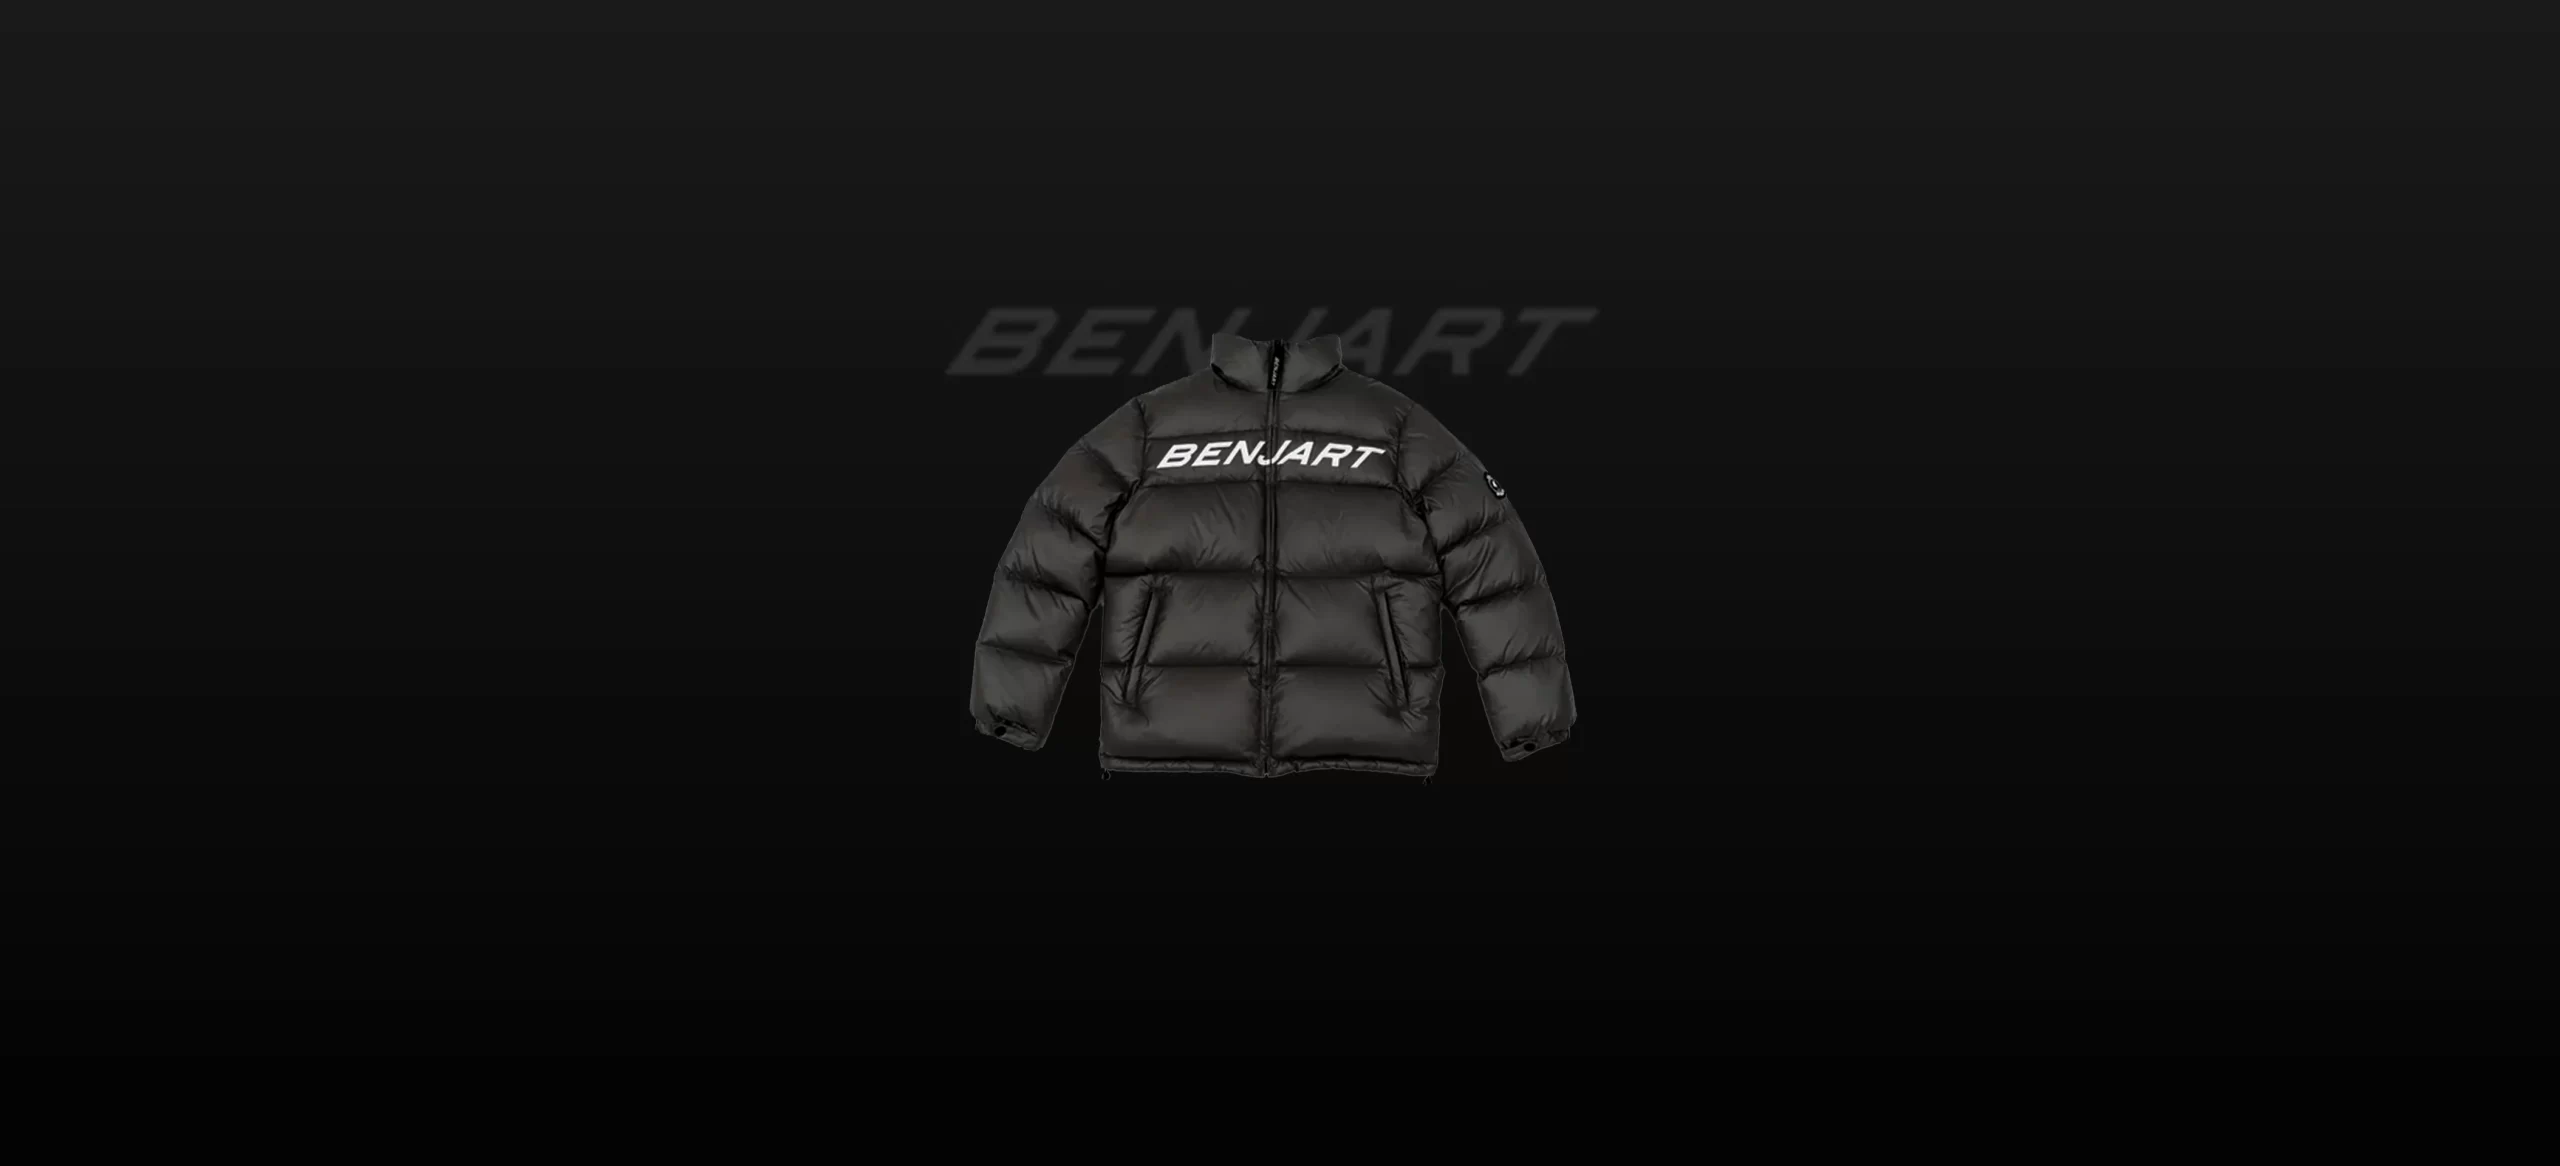 Benjart Coat For Daily Use